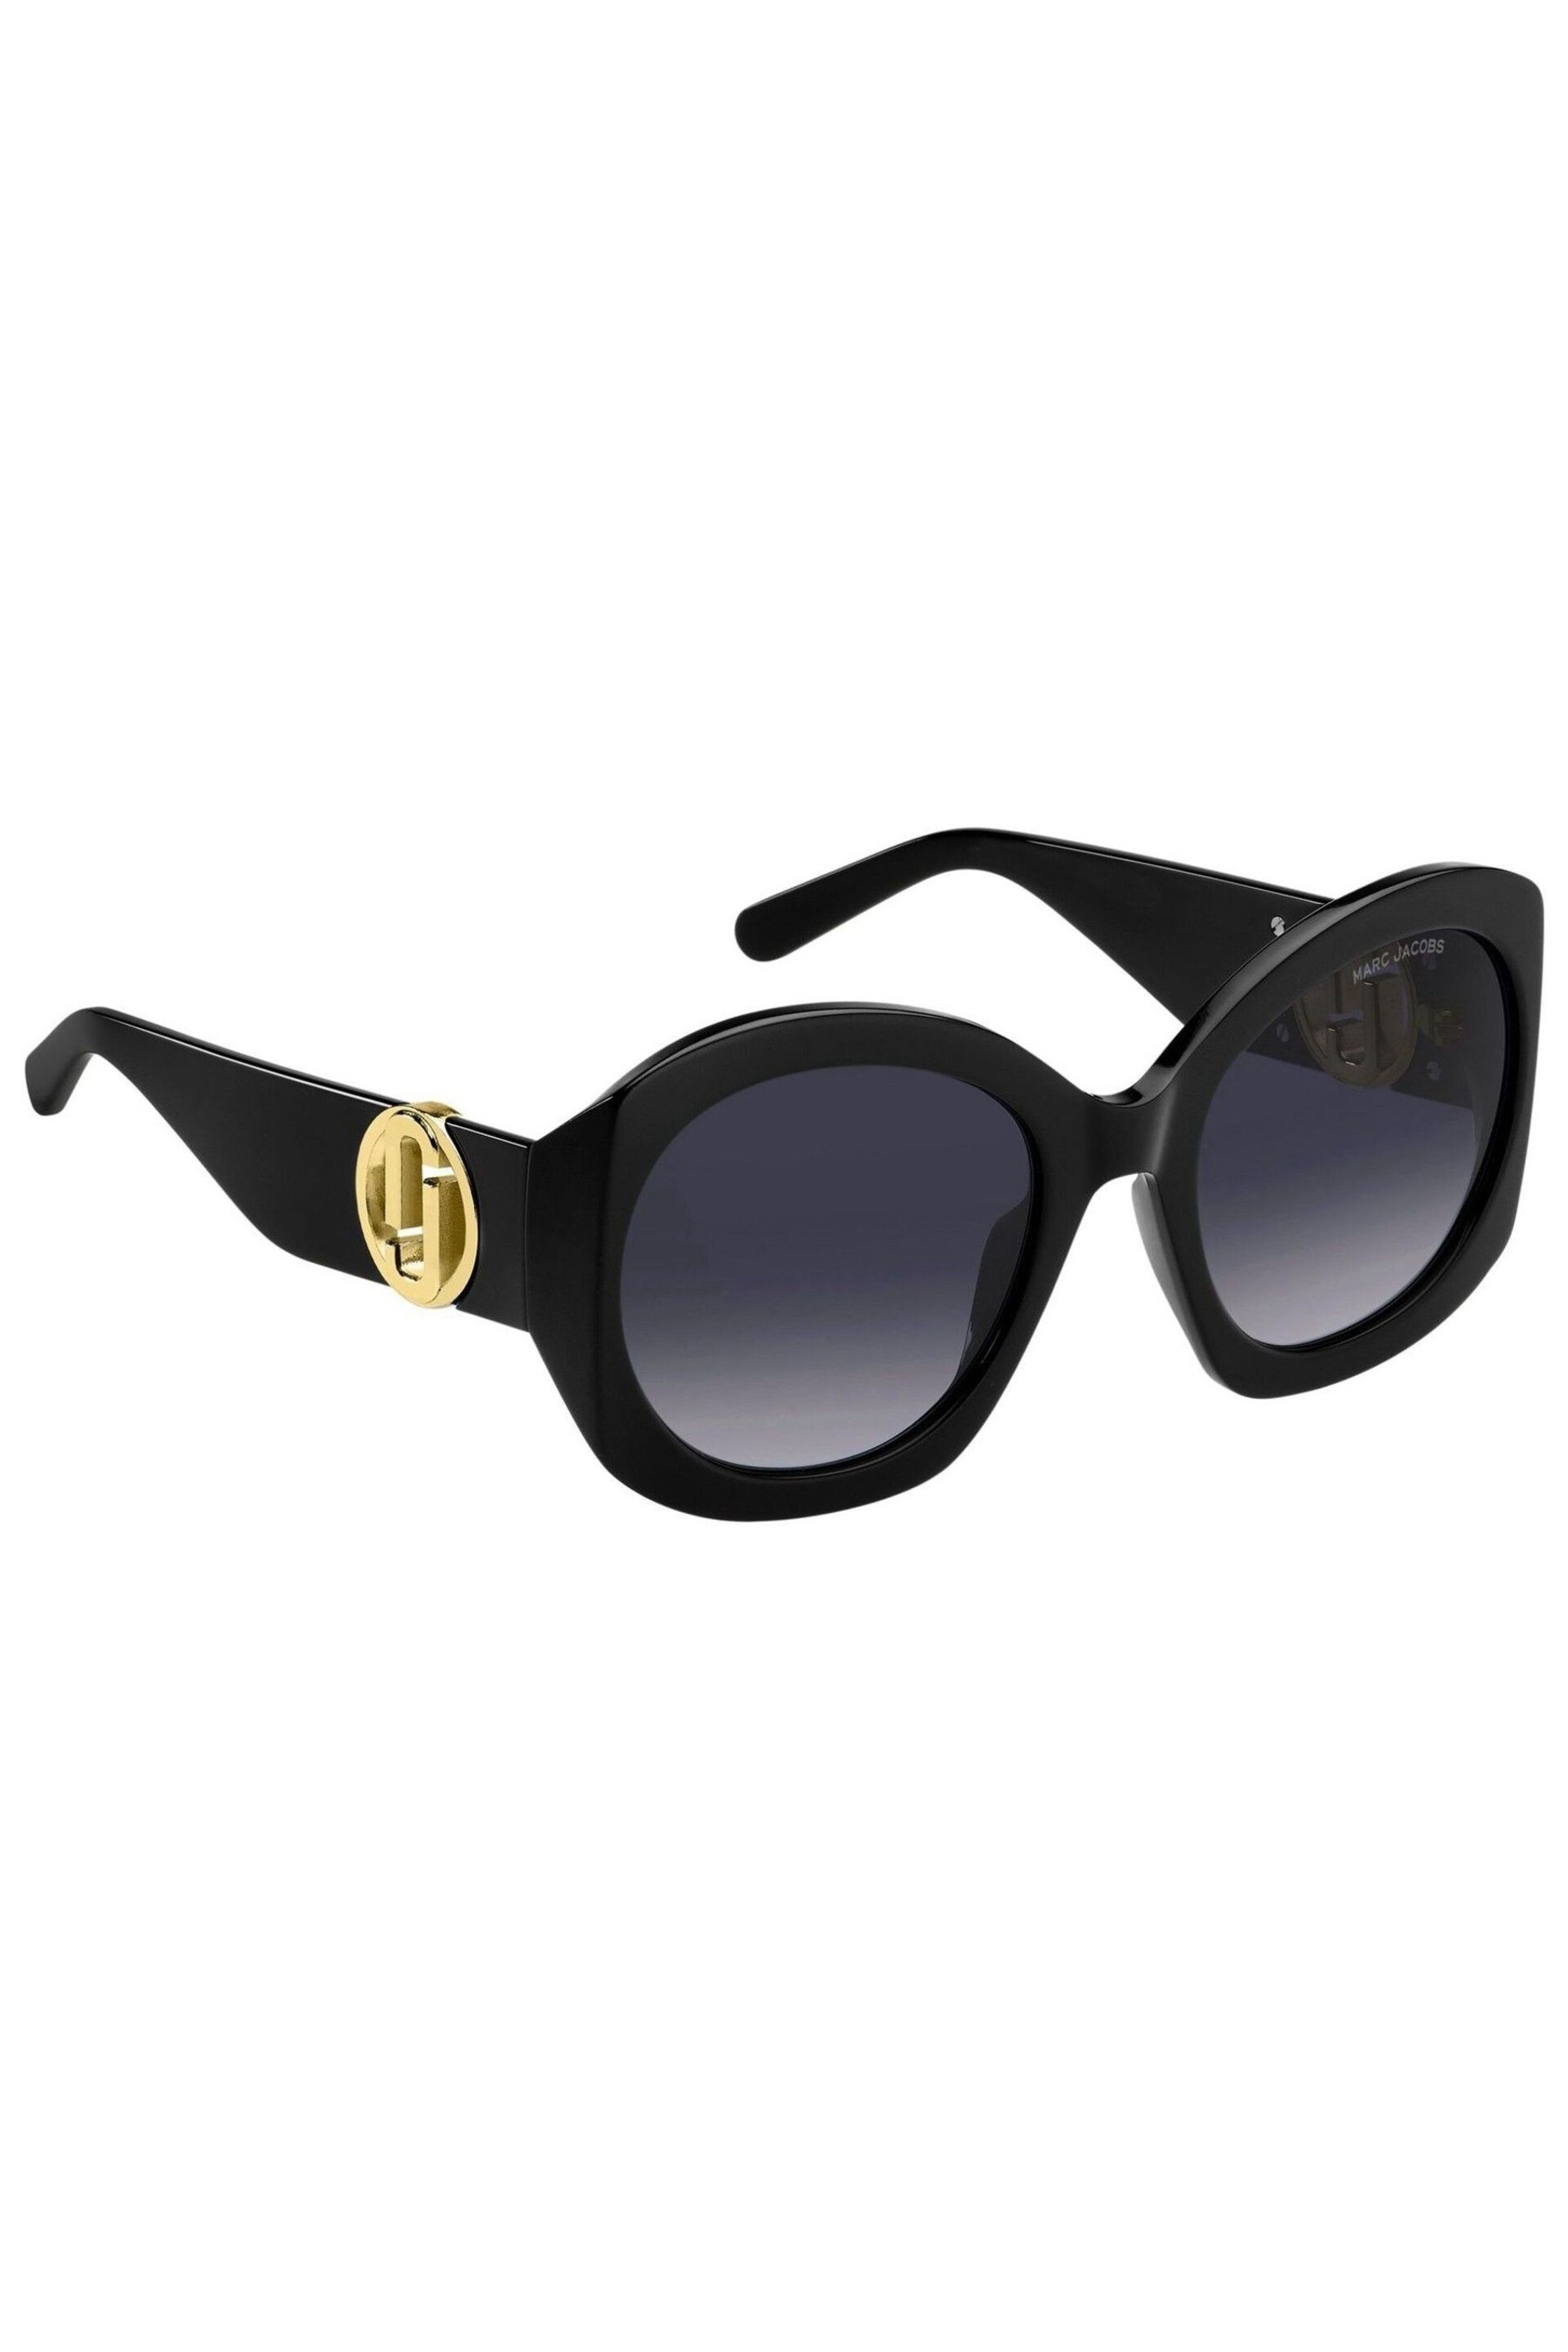 Marc Jacobs 722/S Butterfly Black Sunglasses - Image 1 of 4